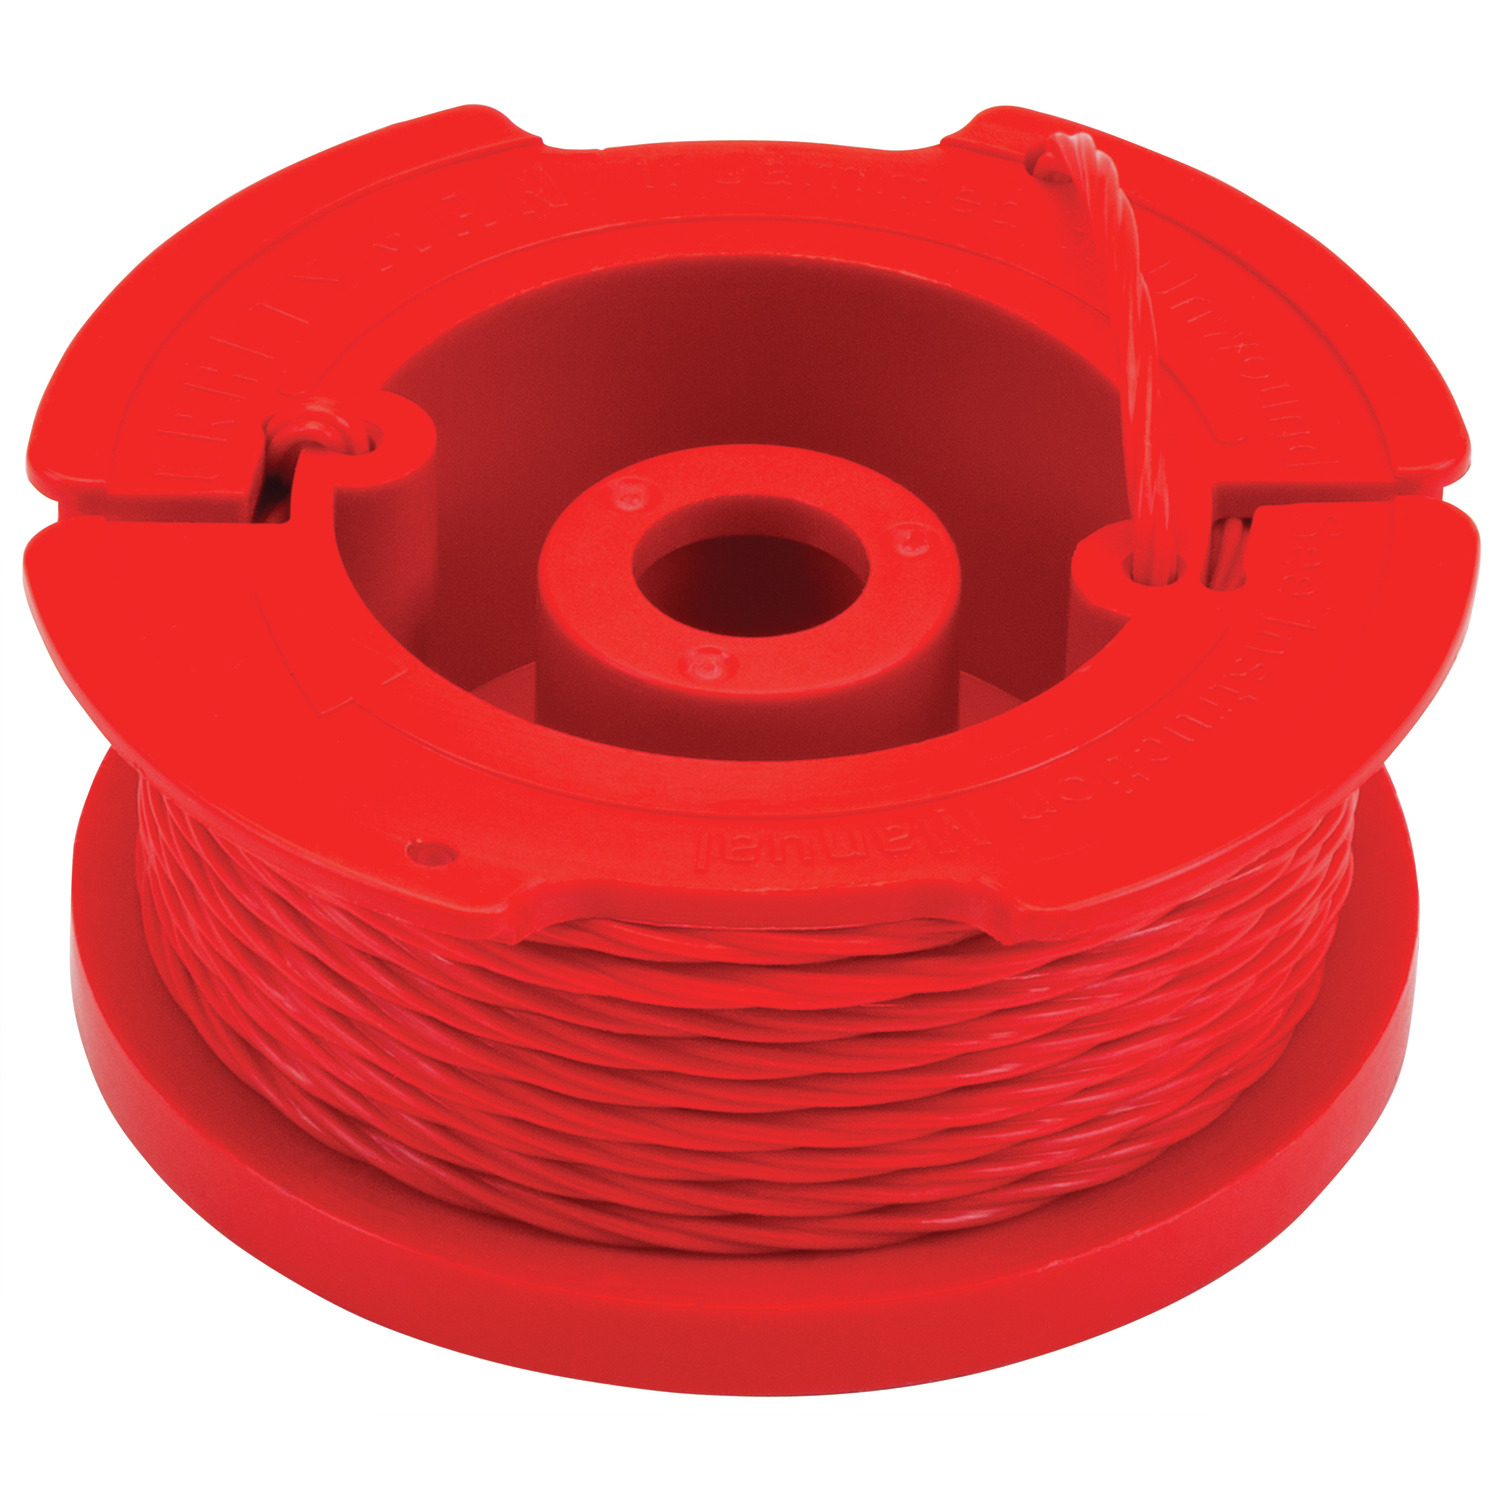 Craftsman Commercial Grade 0.080 in. D X 20 ft. L Trimmer Spool